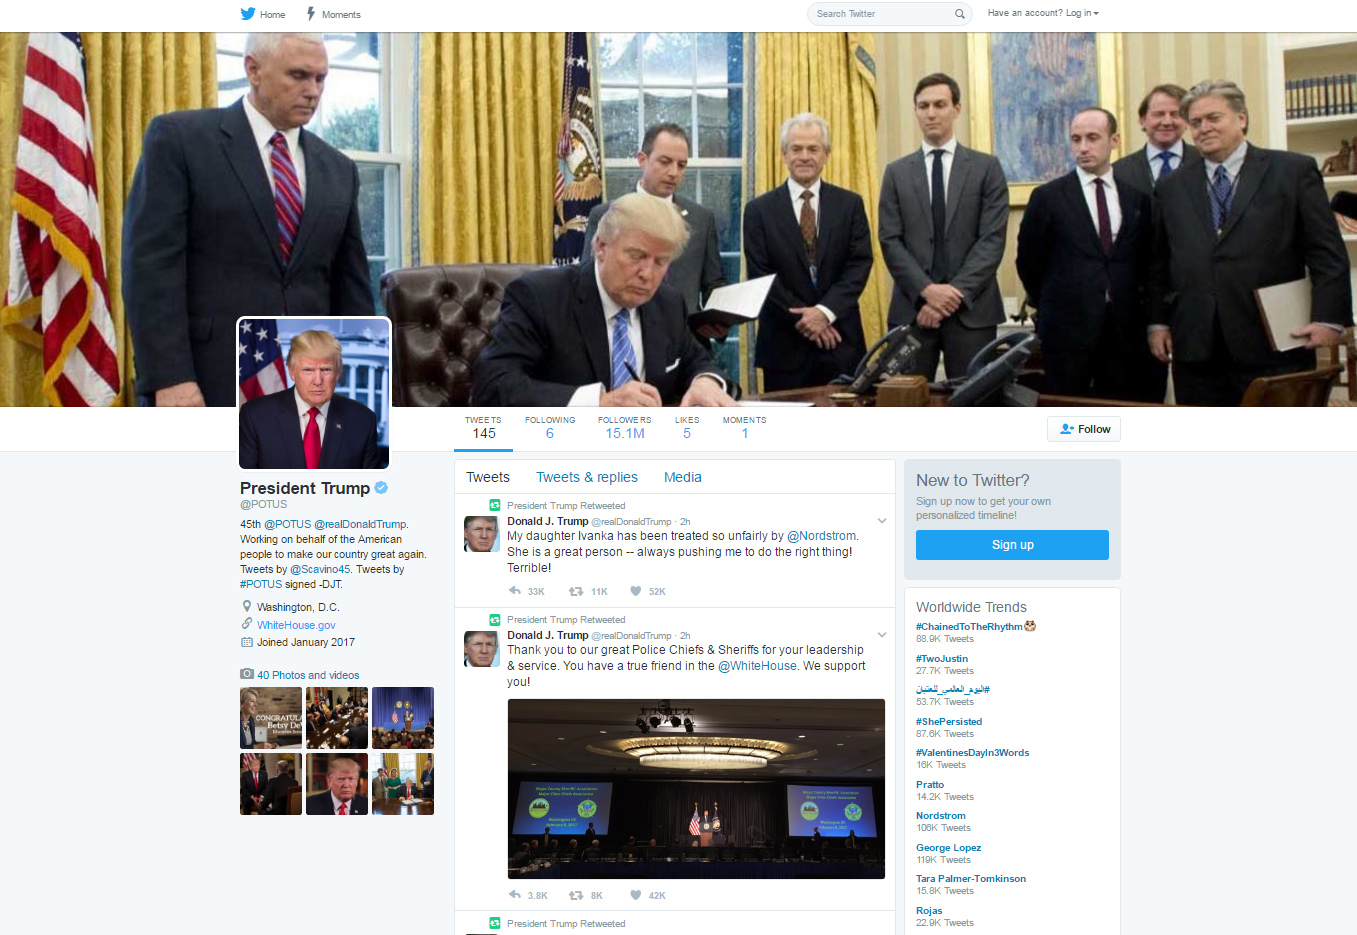 PHOTO: A screen grab made on Feb. 8, 2017 shows the official Twitter feed of the President of the United States.